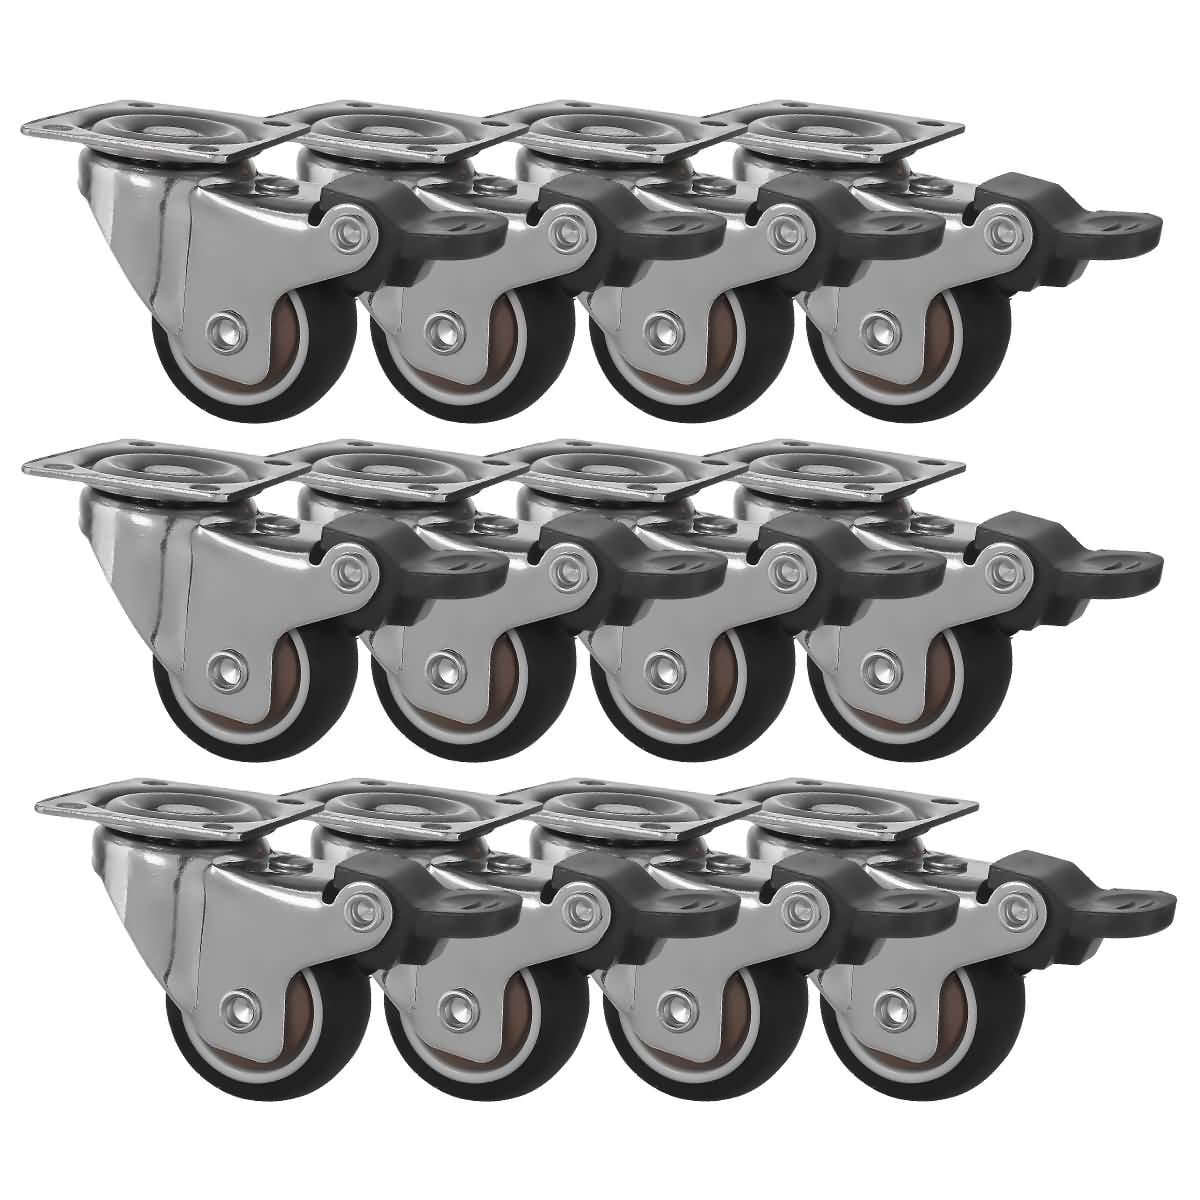 12 Pack 1" Low Profile Swivel Plate With Brake Brown Rubber Caster Wheels 